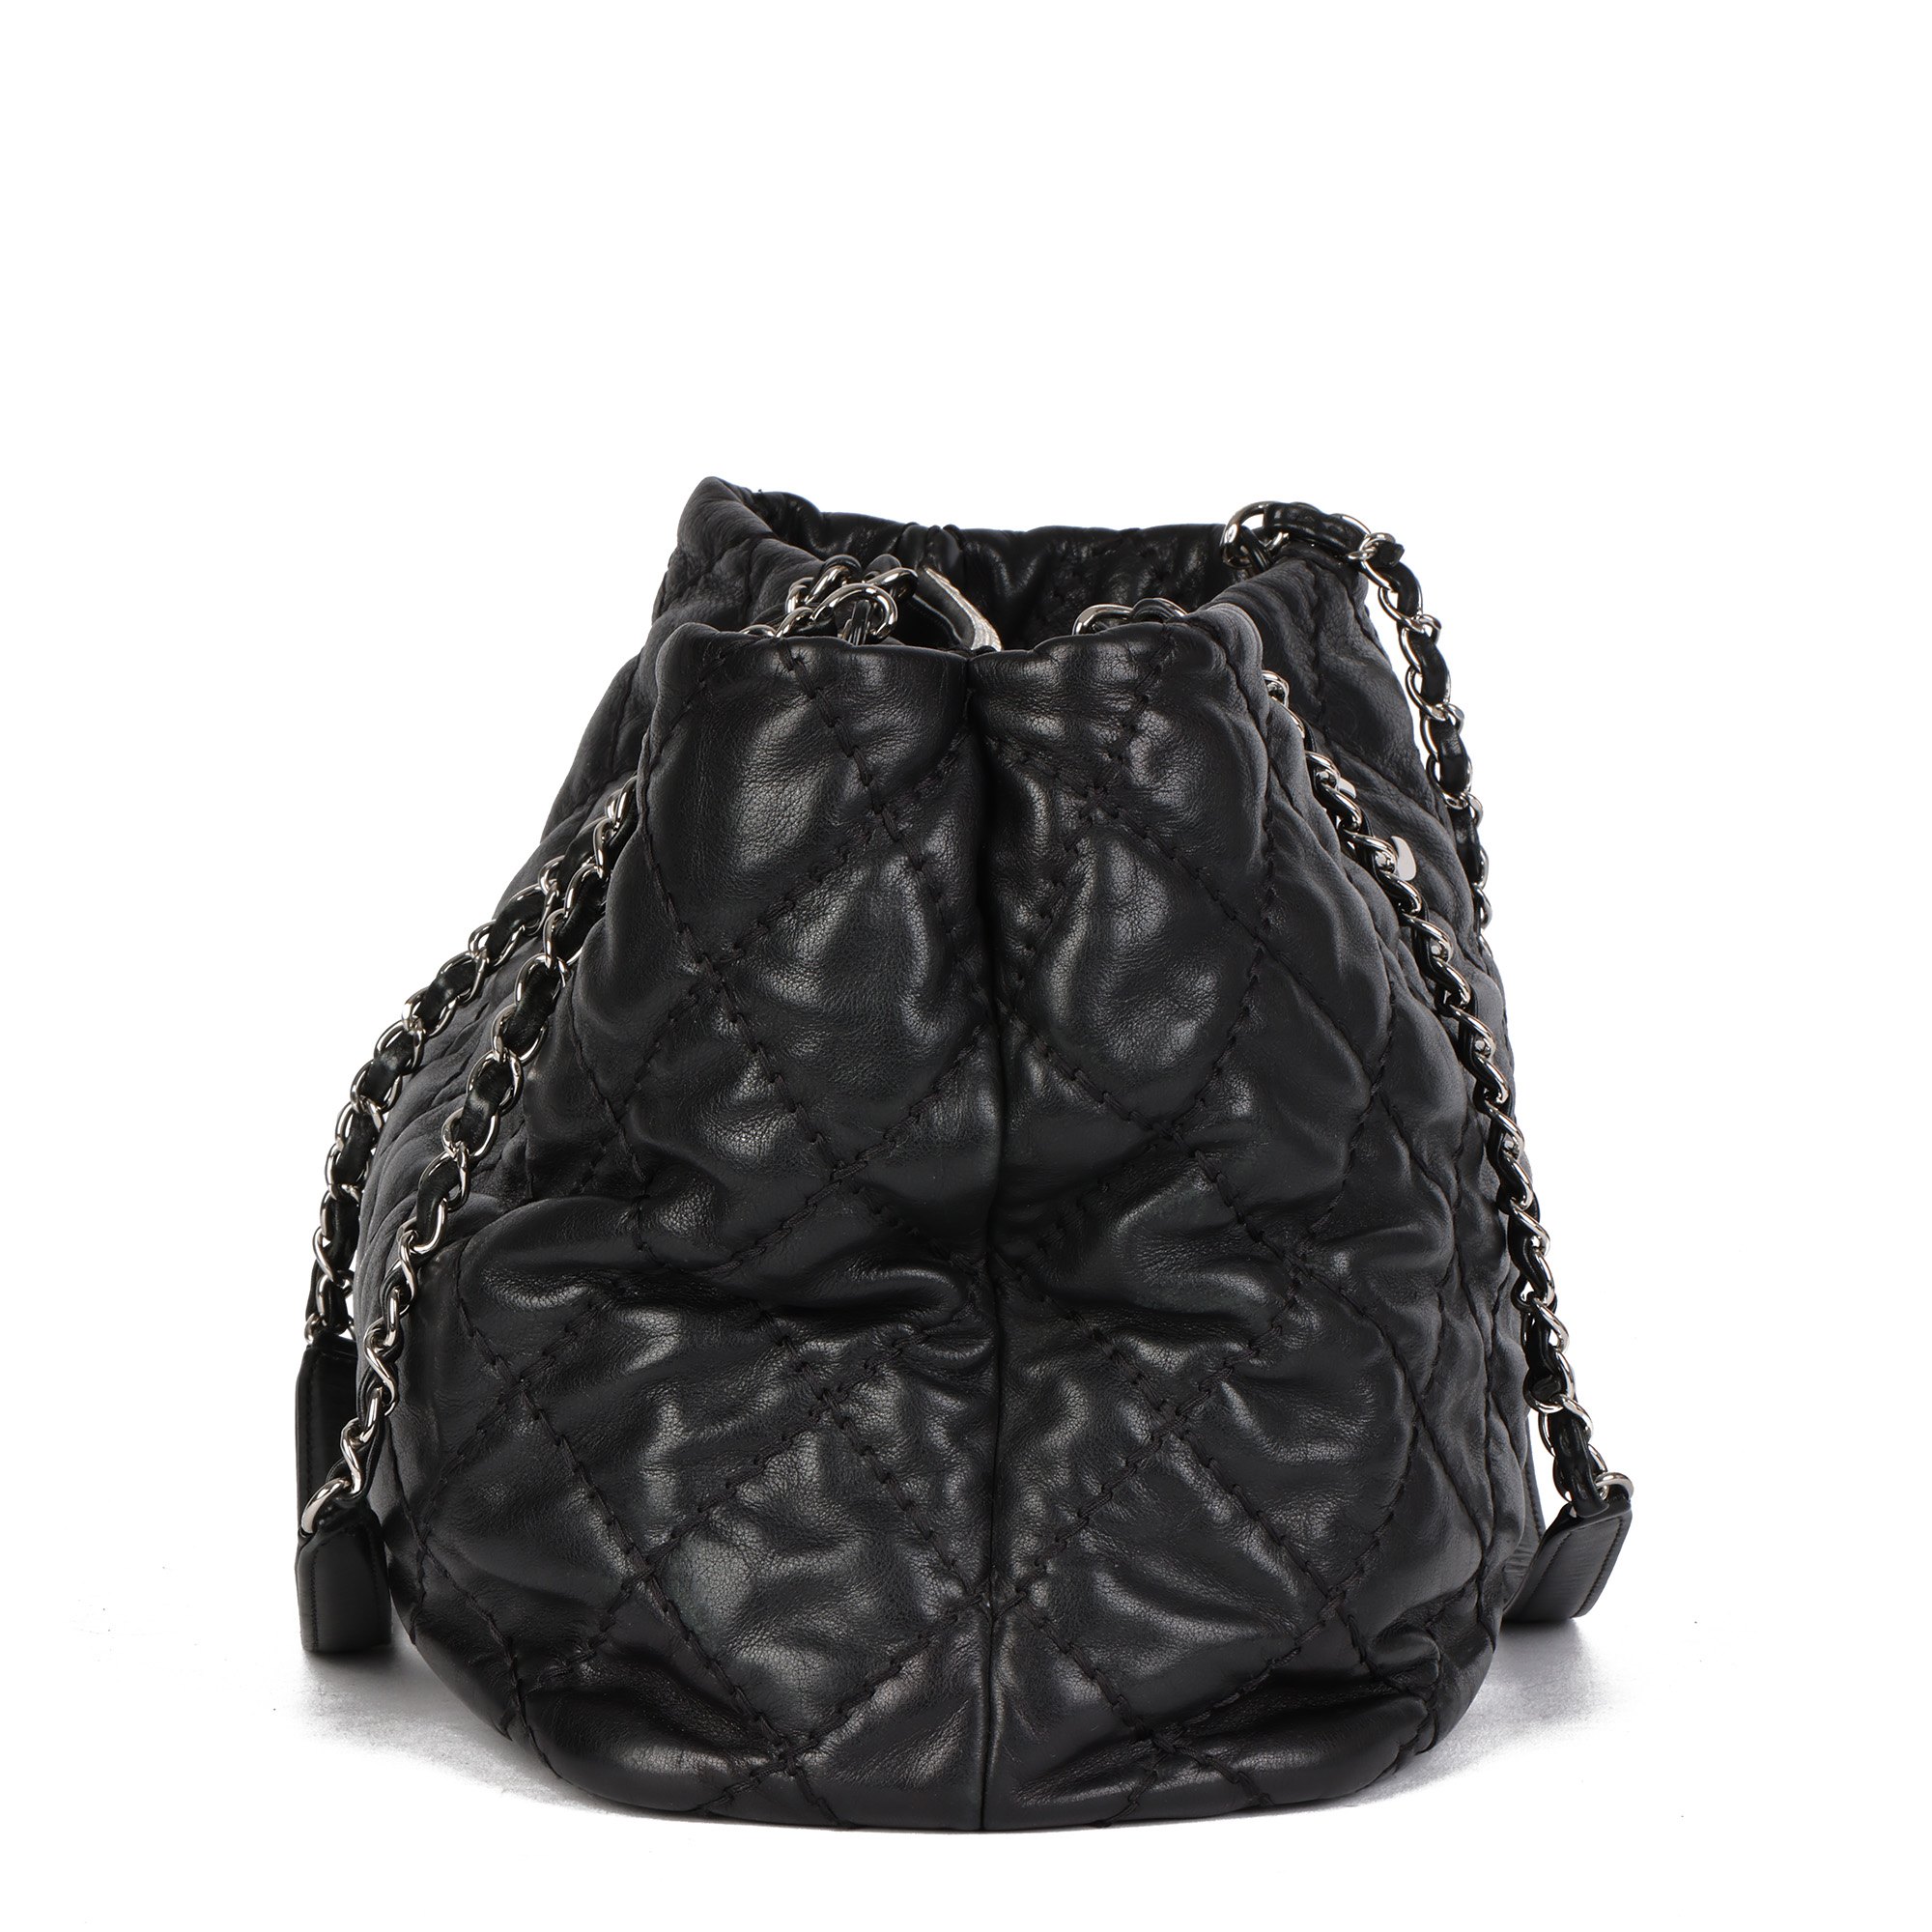 Chanel Black Quilted Aged Calfskin Leather Classic Shoulder Tote